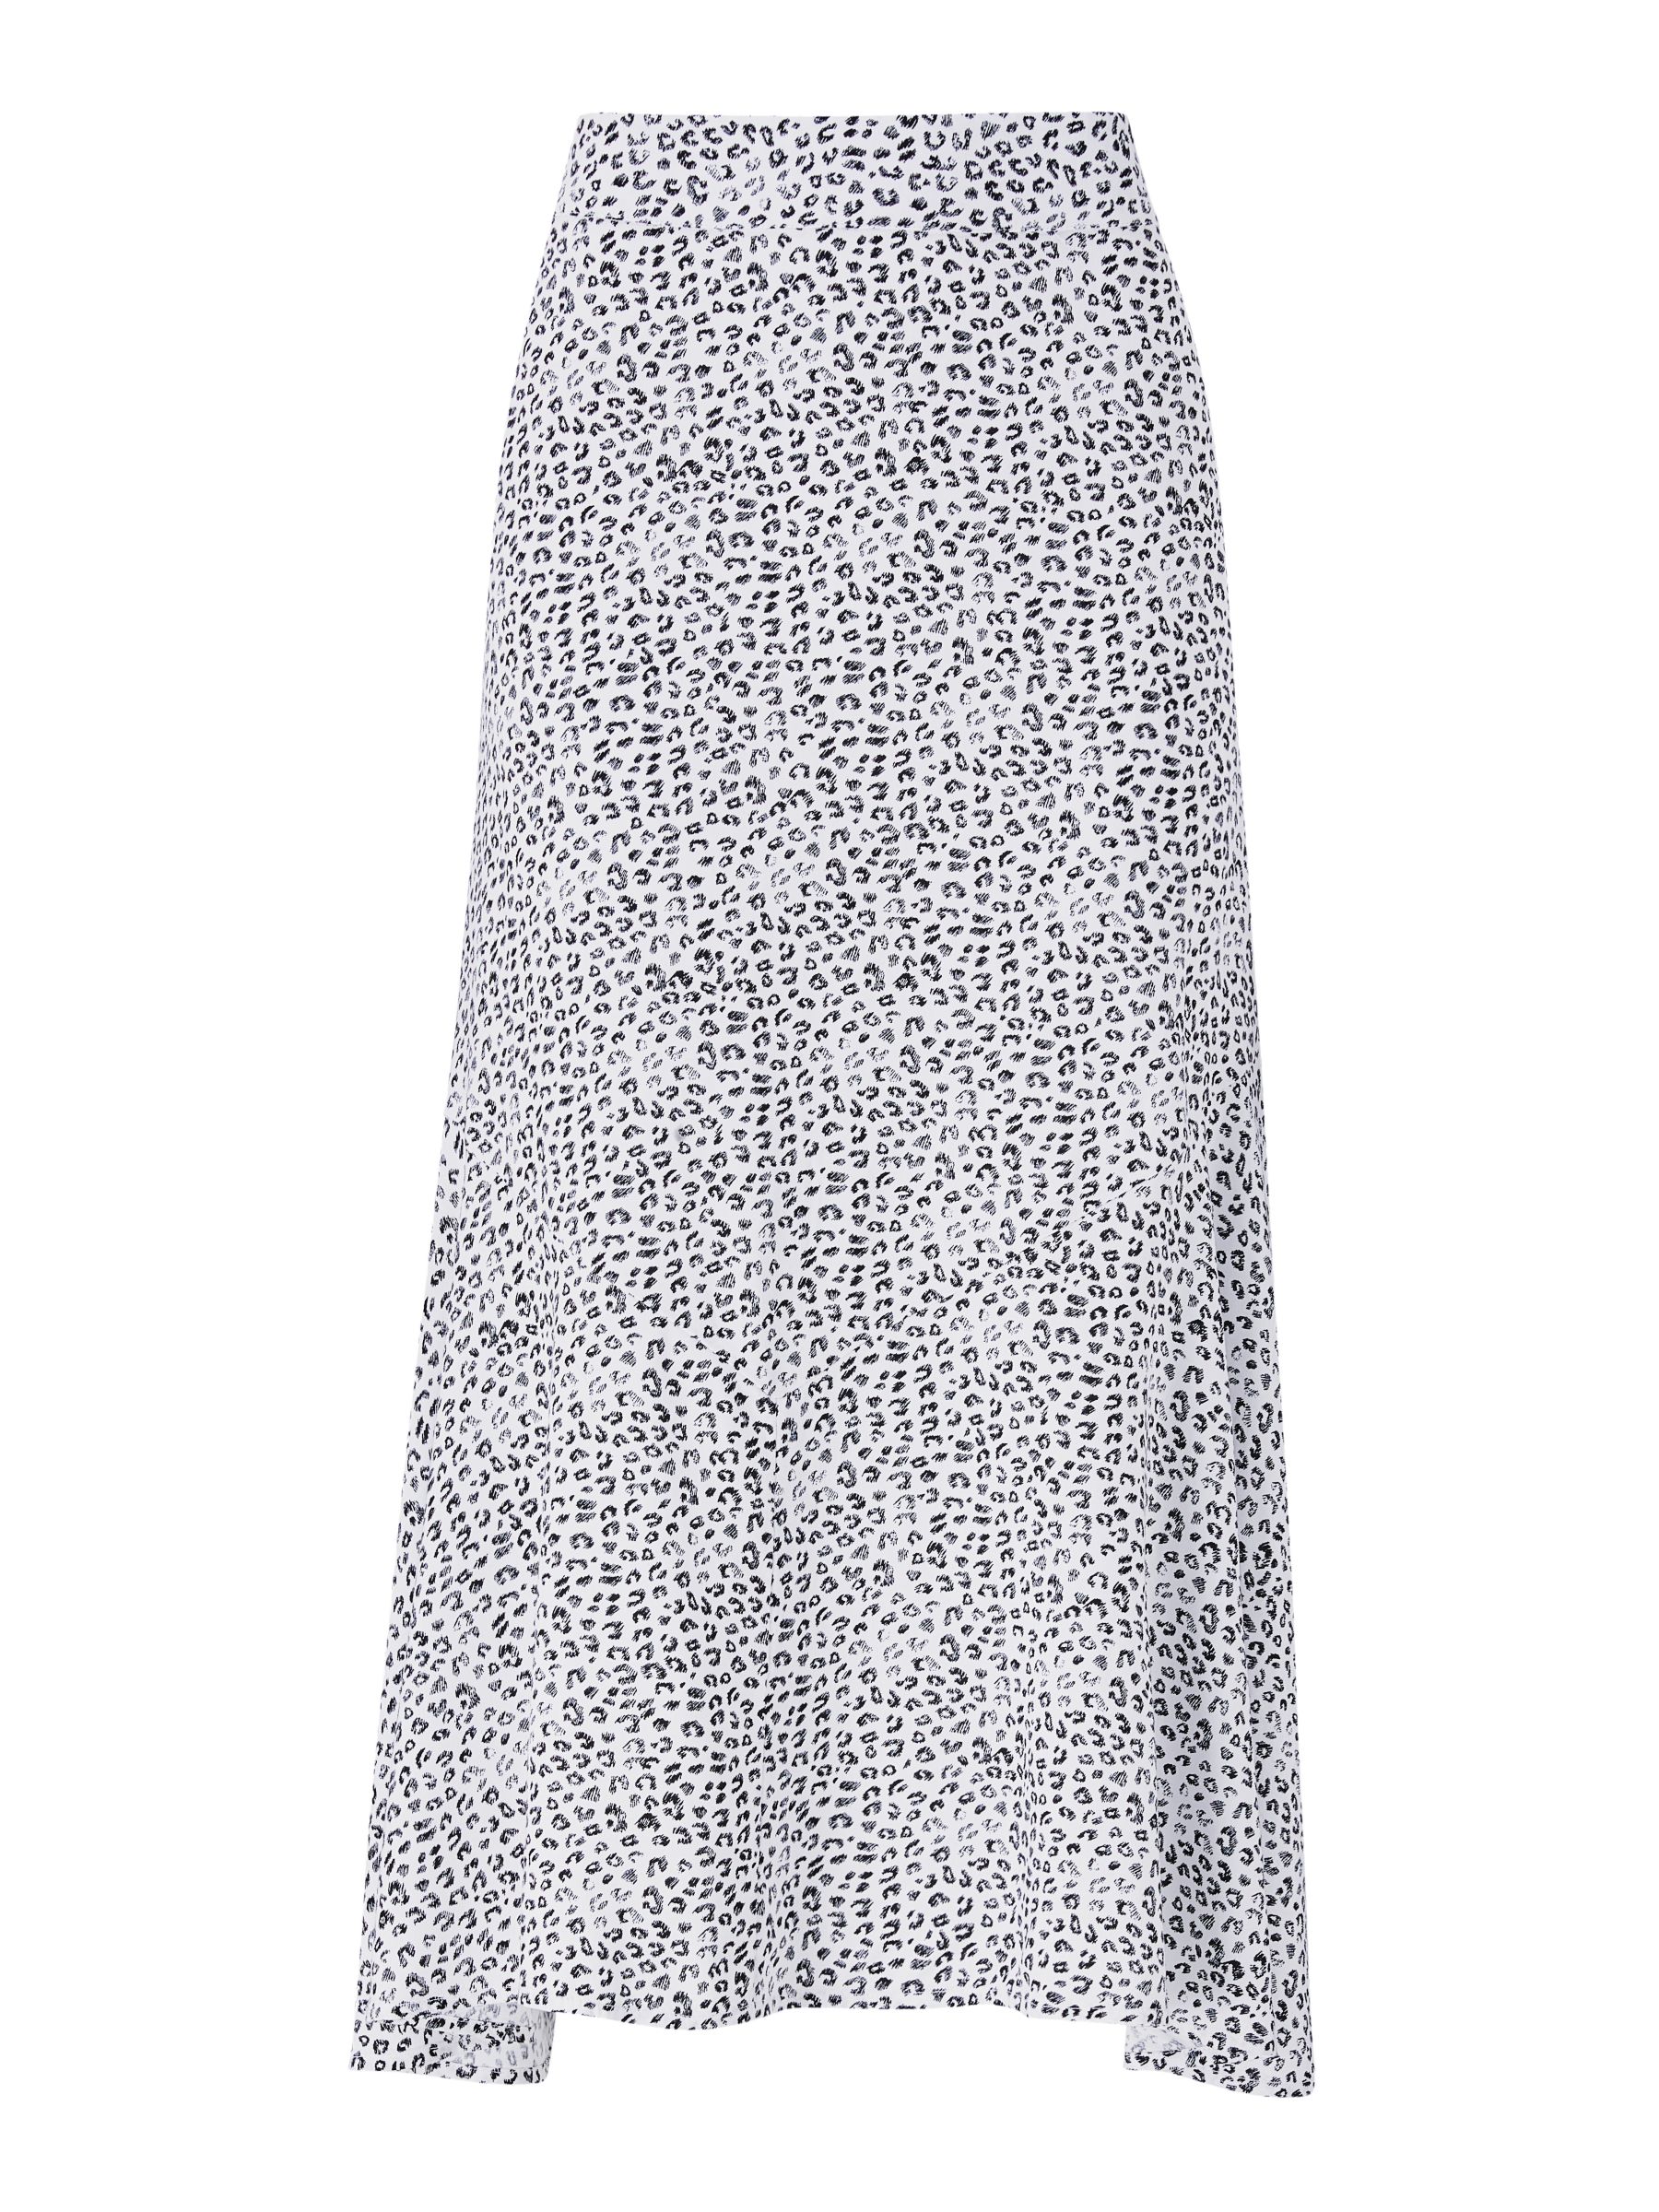 Collection WEEKEND by John Lewis Leopard Print Midi Skirt, White/Black